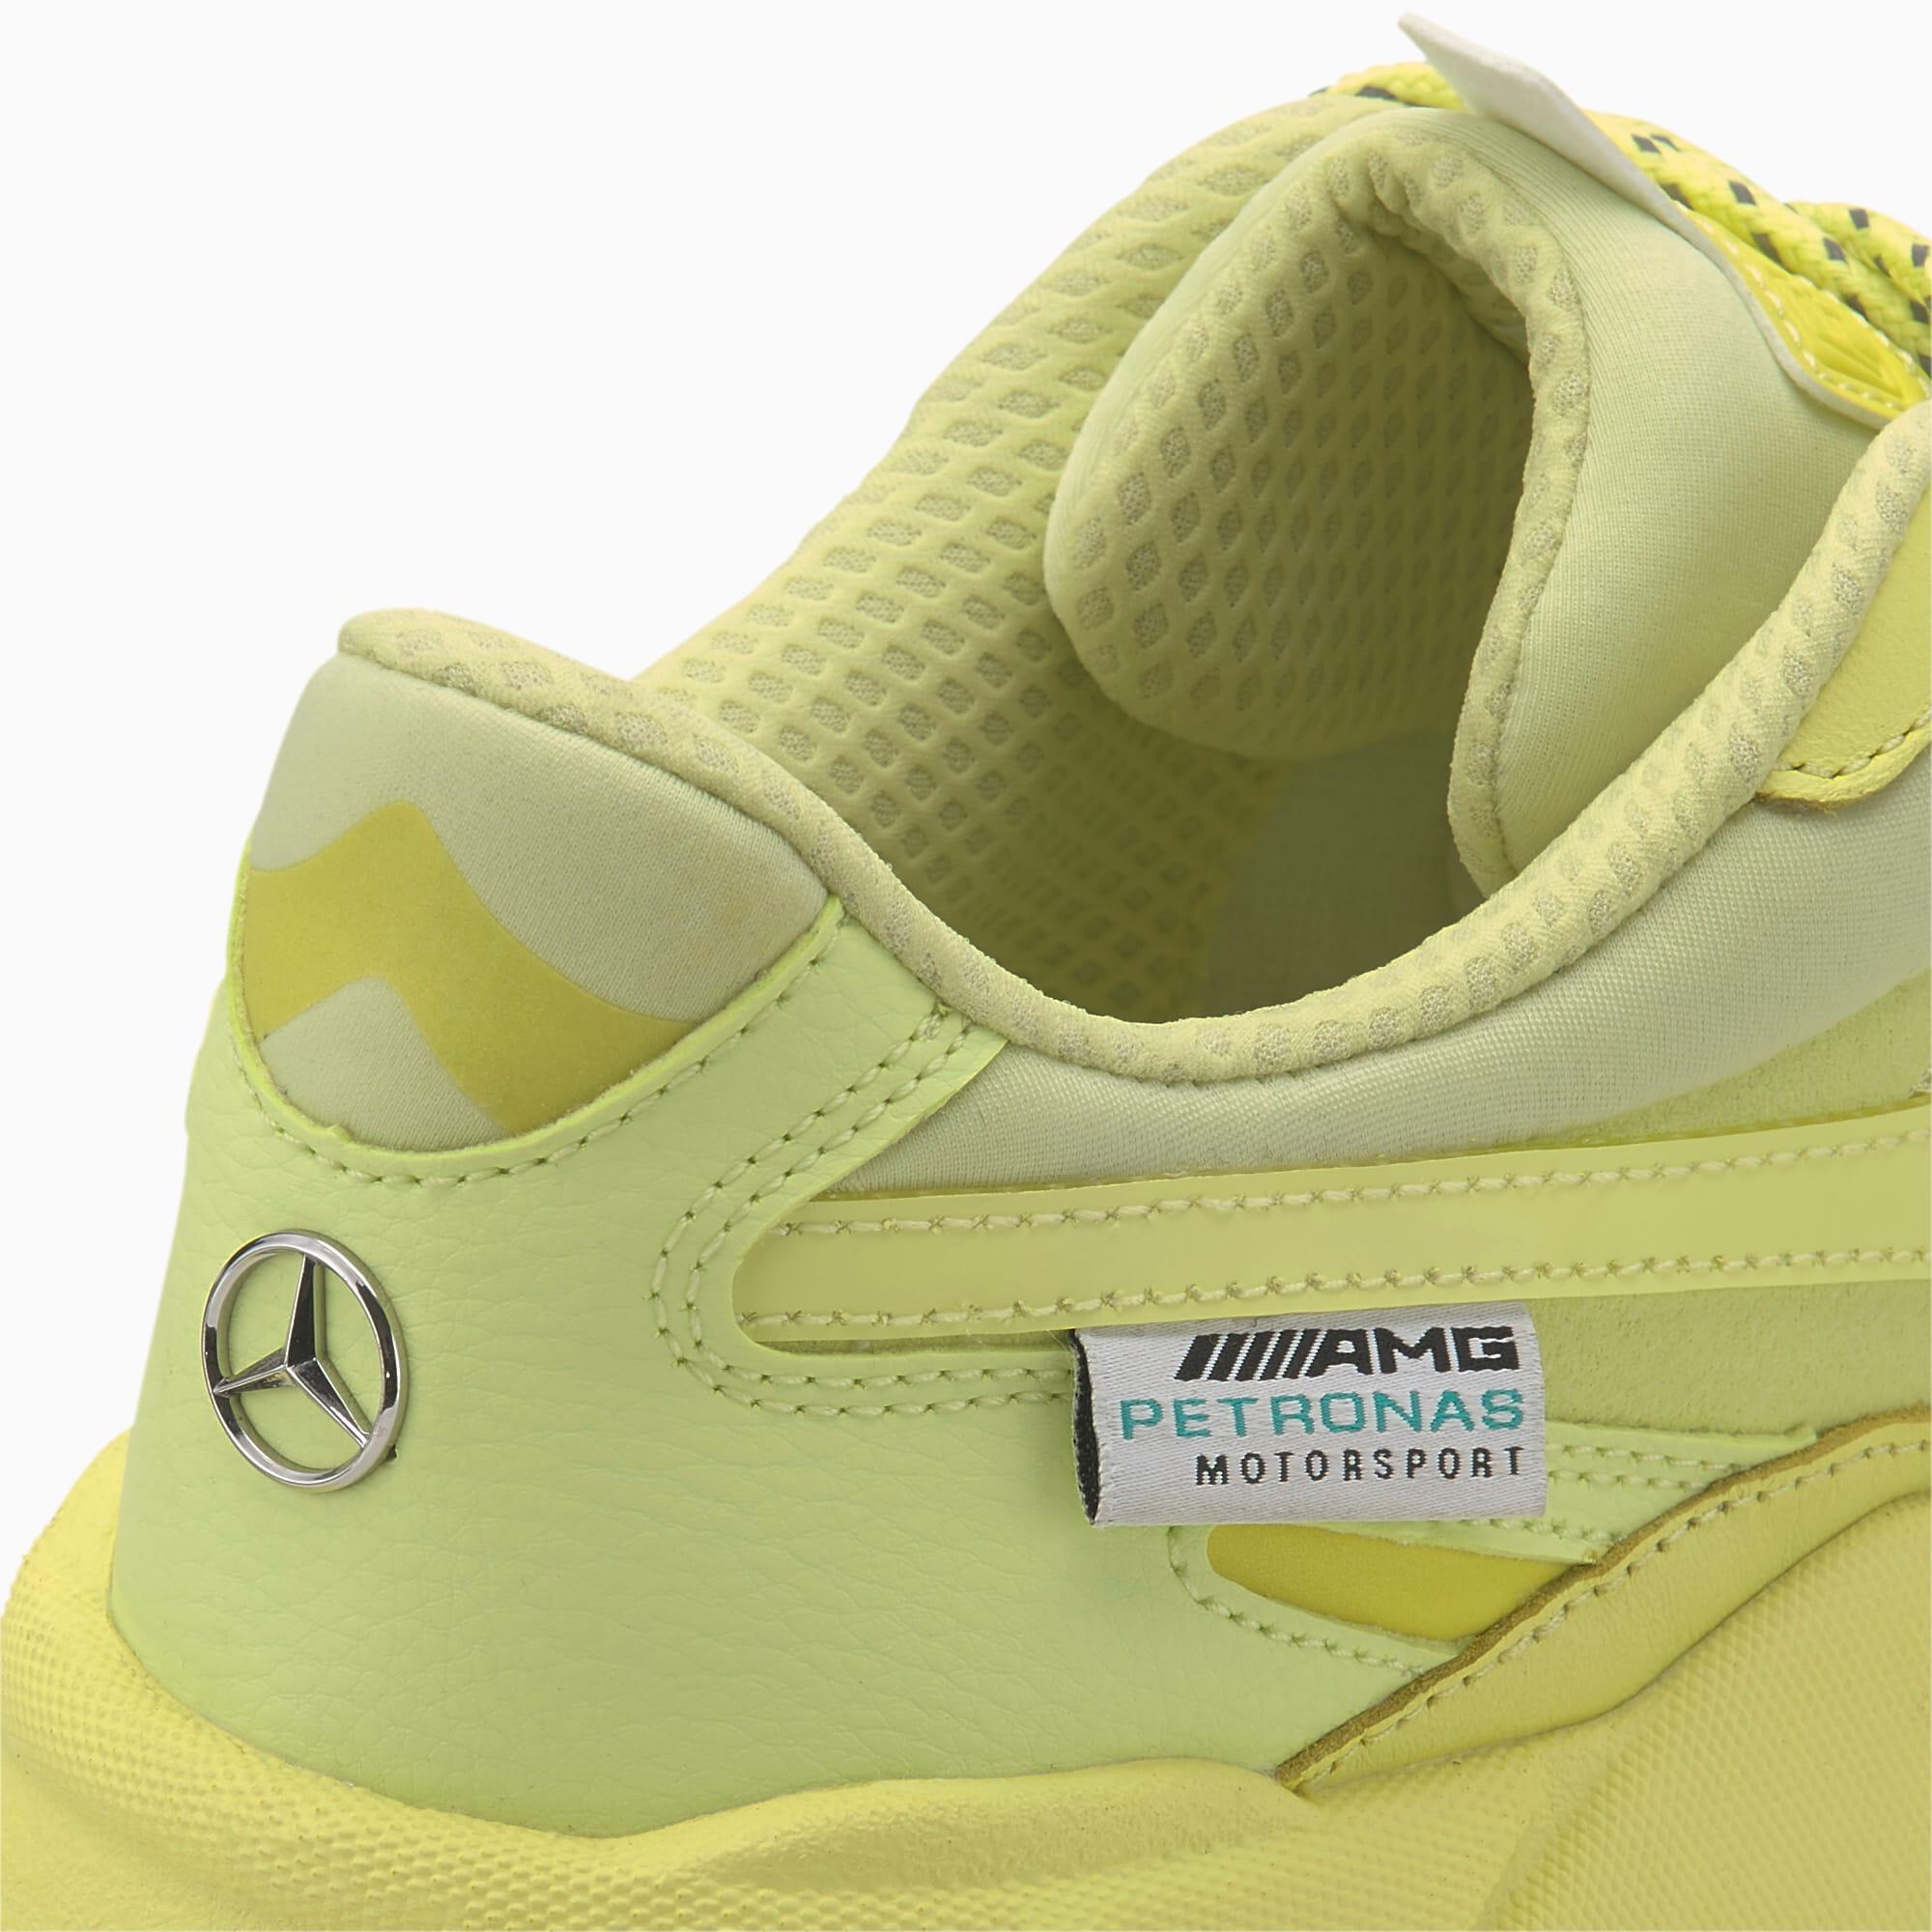 PUMA Synthetic Mercedes Amg Petronas Rs-x3 Sneakers in Green for ...